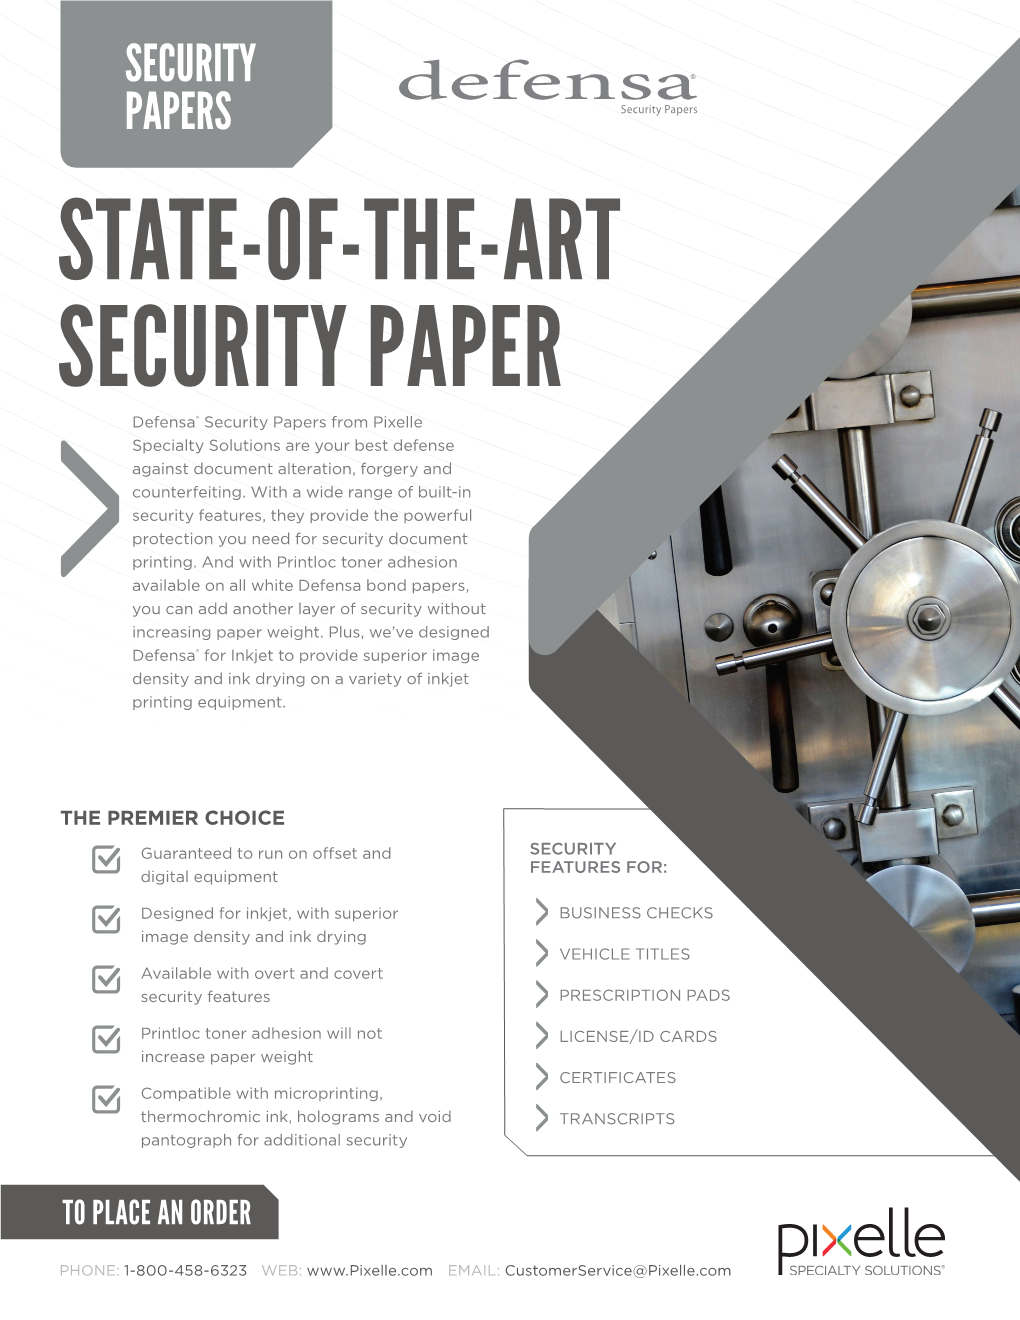 Pixelle Specialty Solutions State-Of-The-Art Security Paper